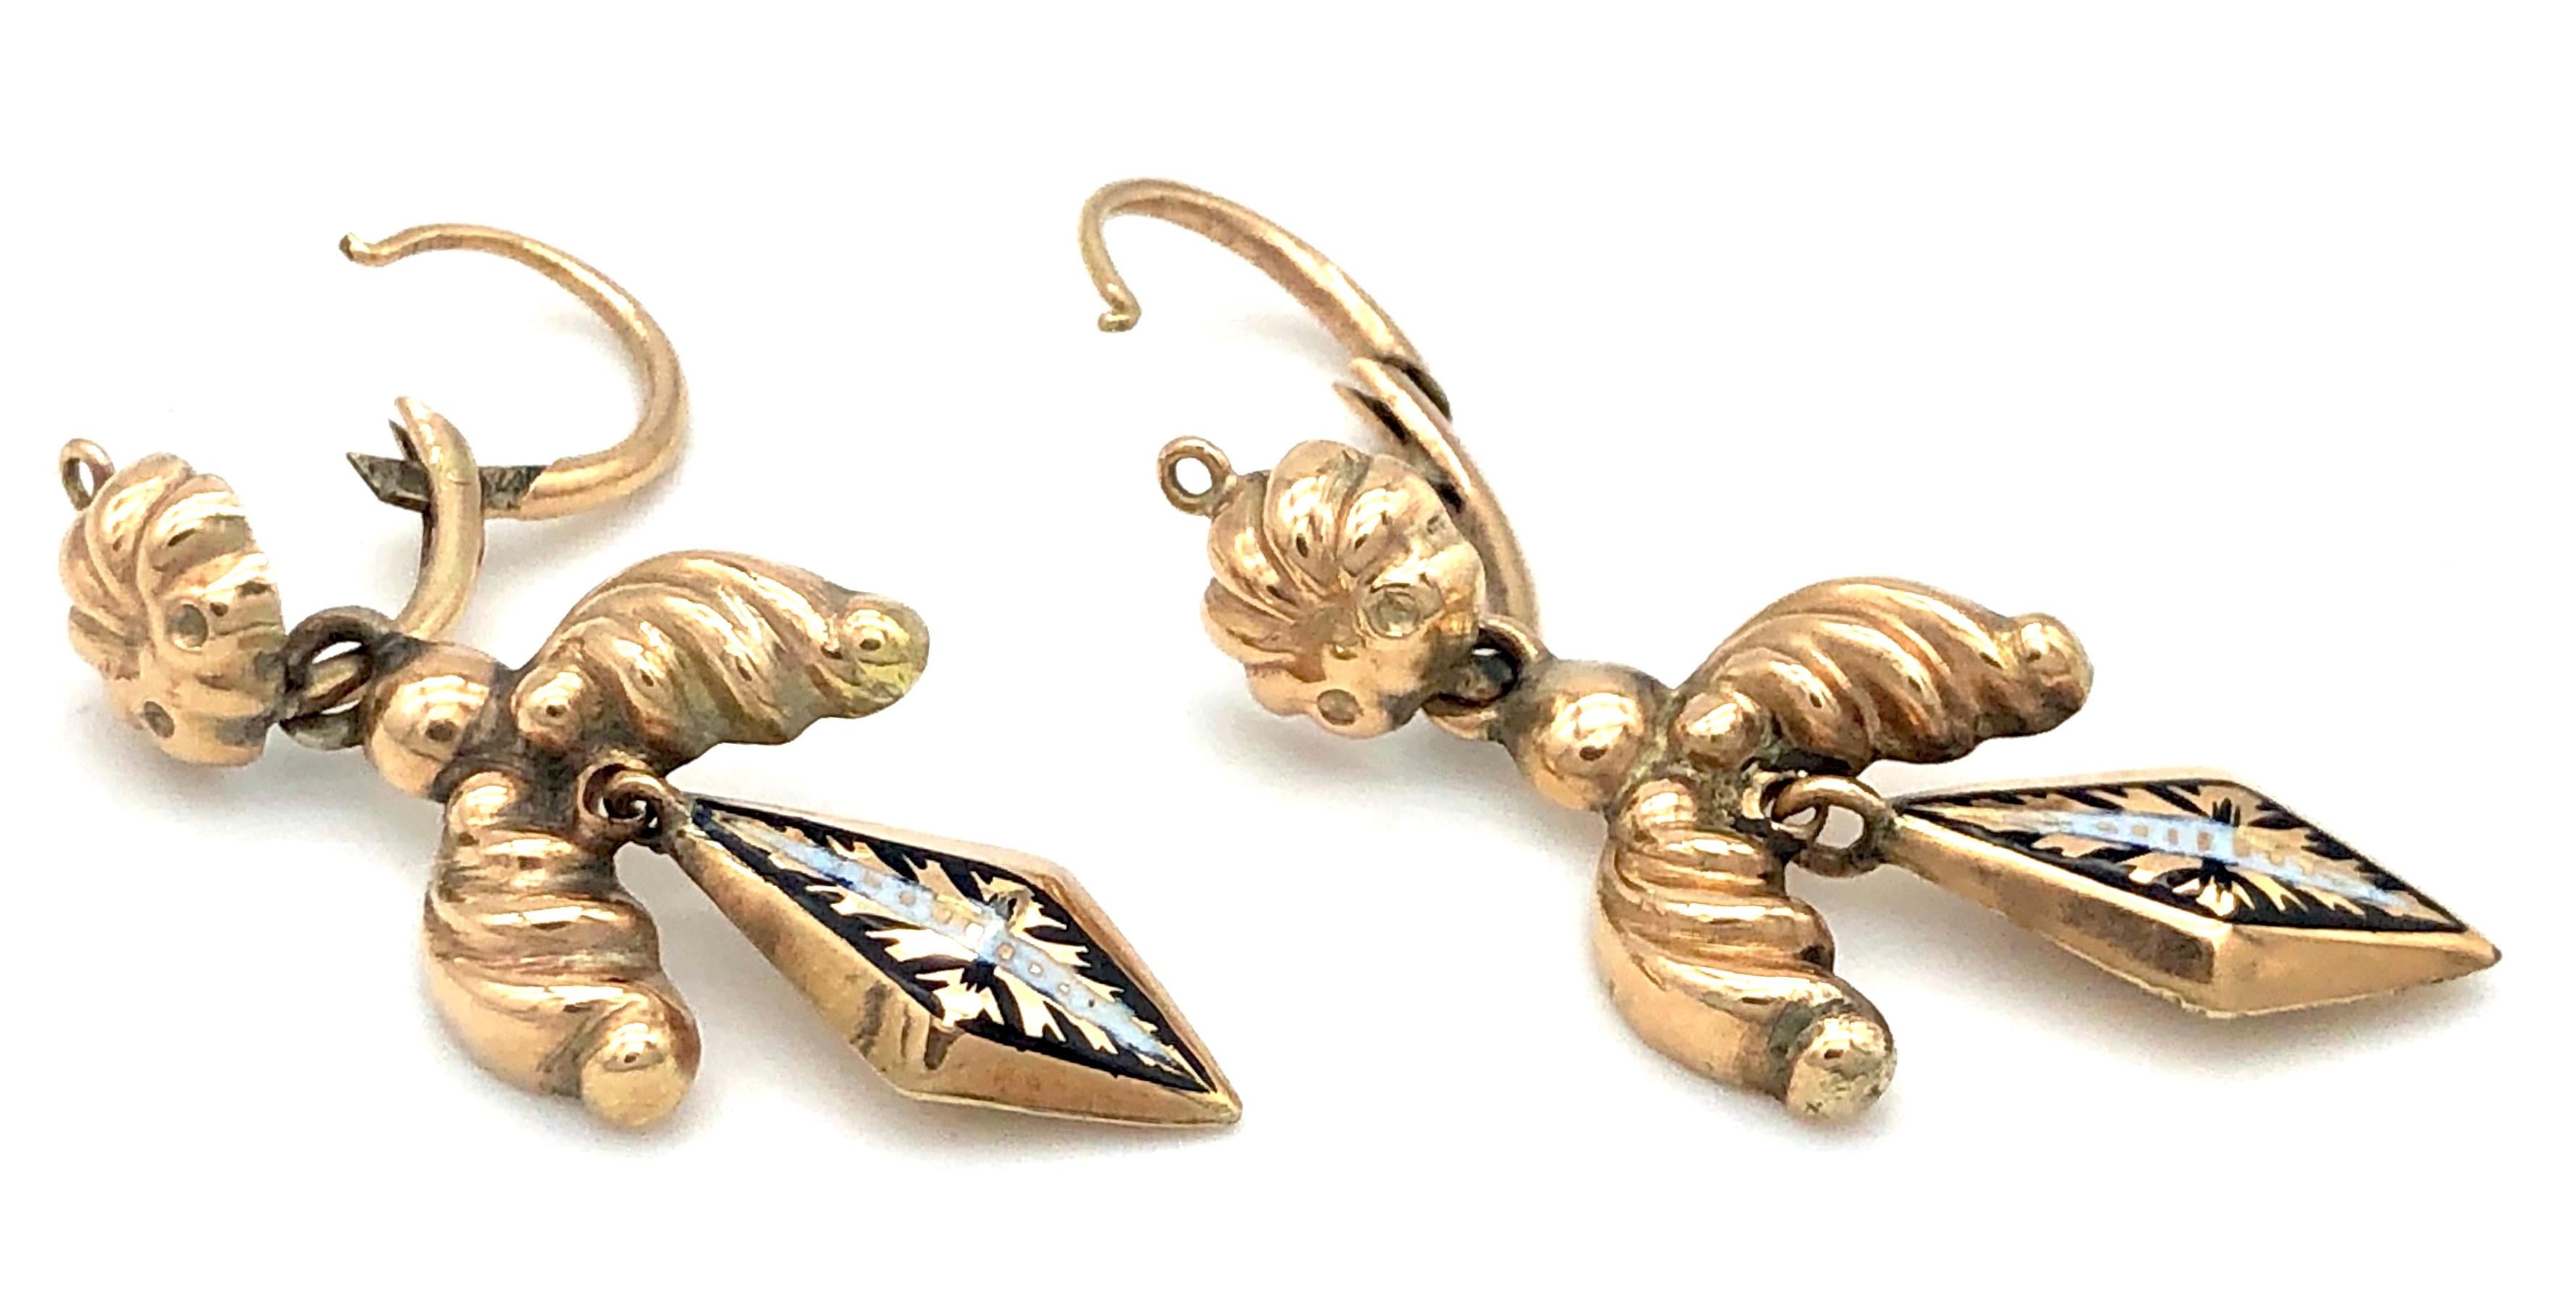 Rare and unusual dangling rosegold earrings with elegant and intakt two tone
enamel decoration.